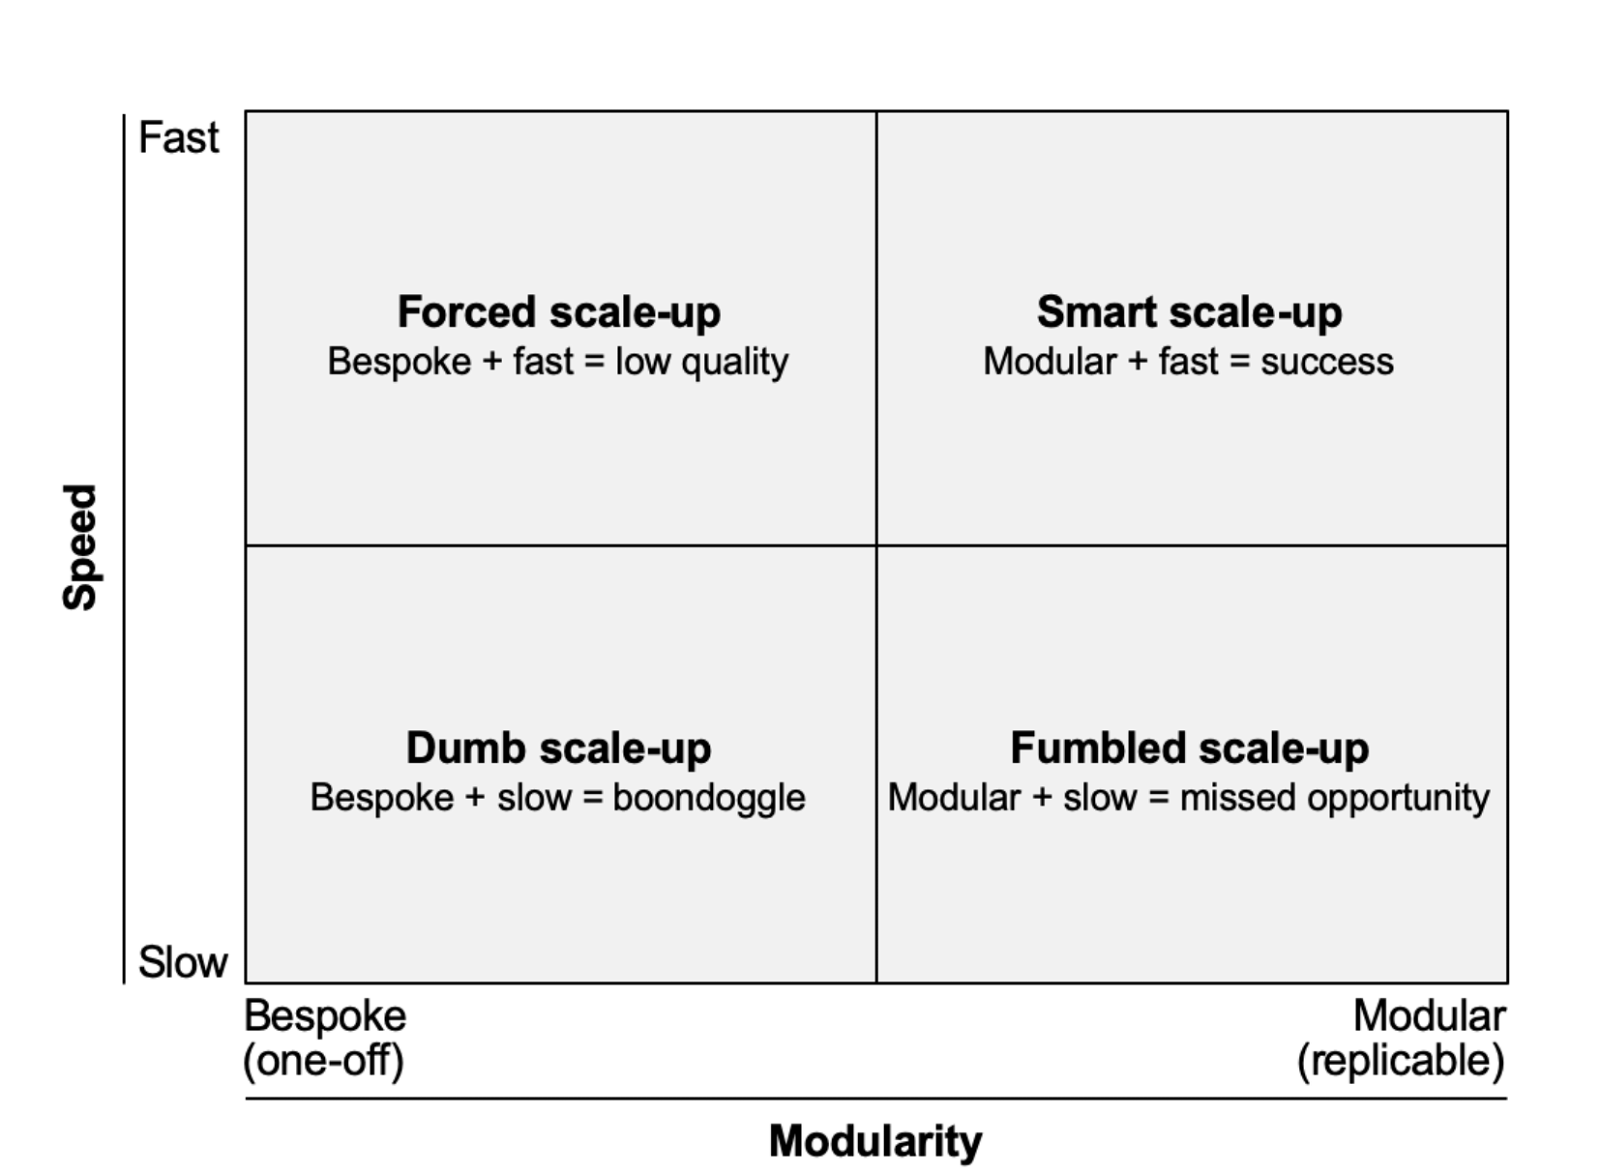 Figure 2: Four ways to scale model from Bent Flyvbjerg’s paper on the subject (source: https://arxiv.org/pdf/2101.11104.pdf)
